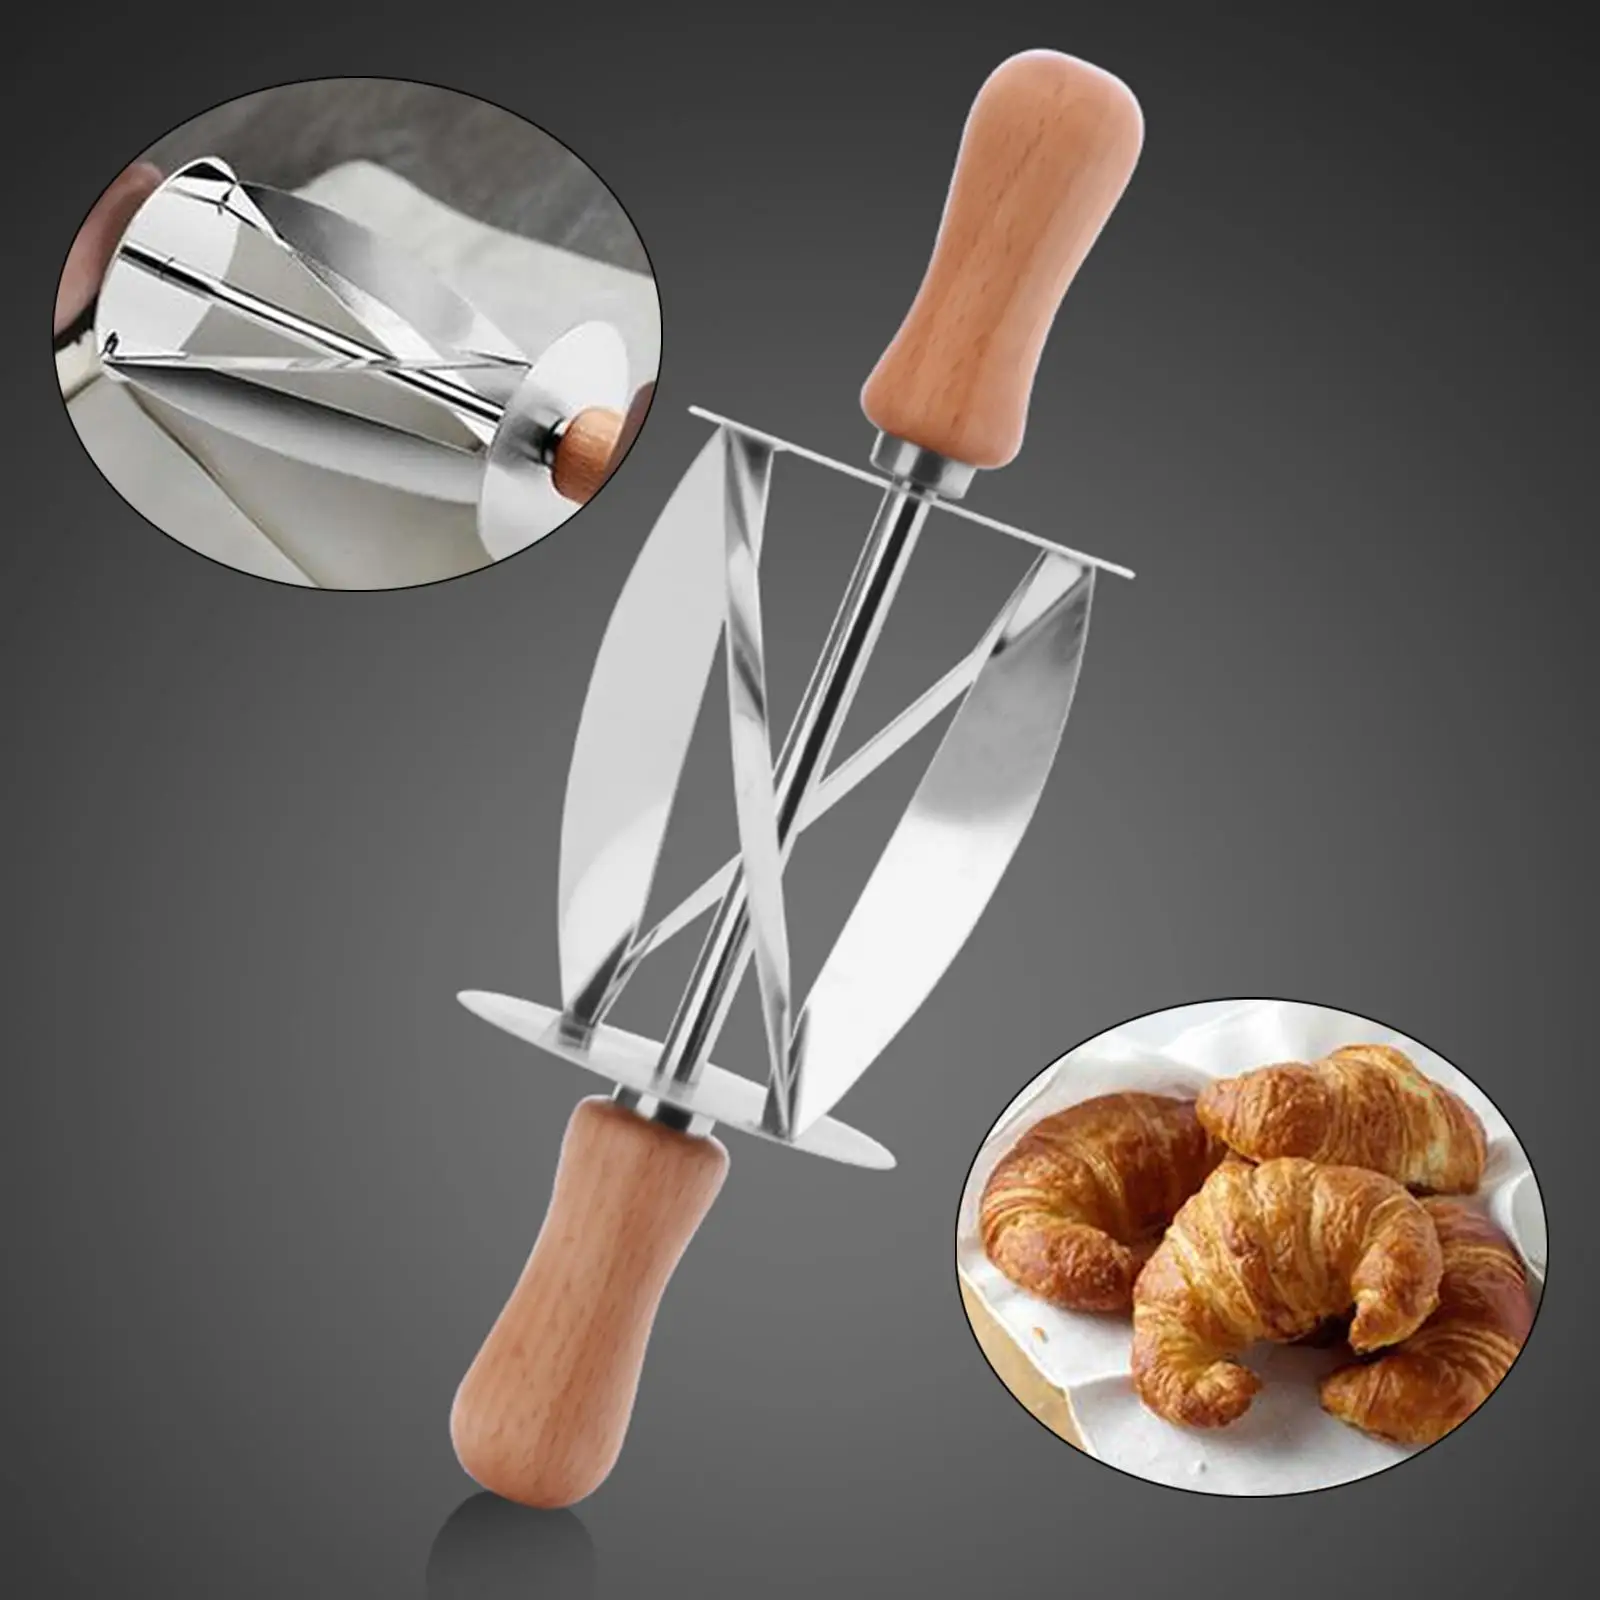 Stainless Steel Bread Roller Cutter with Wooden Handle Multifunction Rolling Pastry Cutter Kitchen Accessories